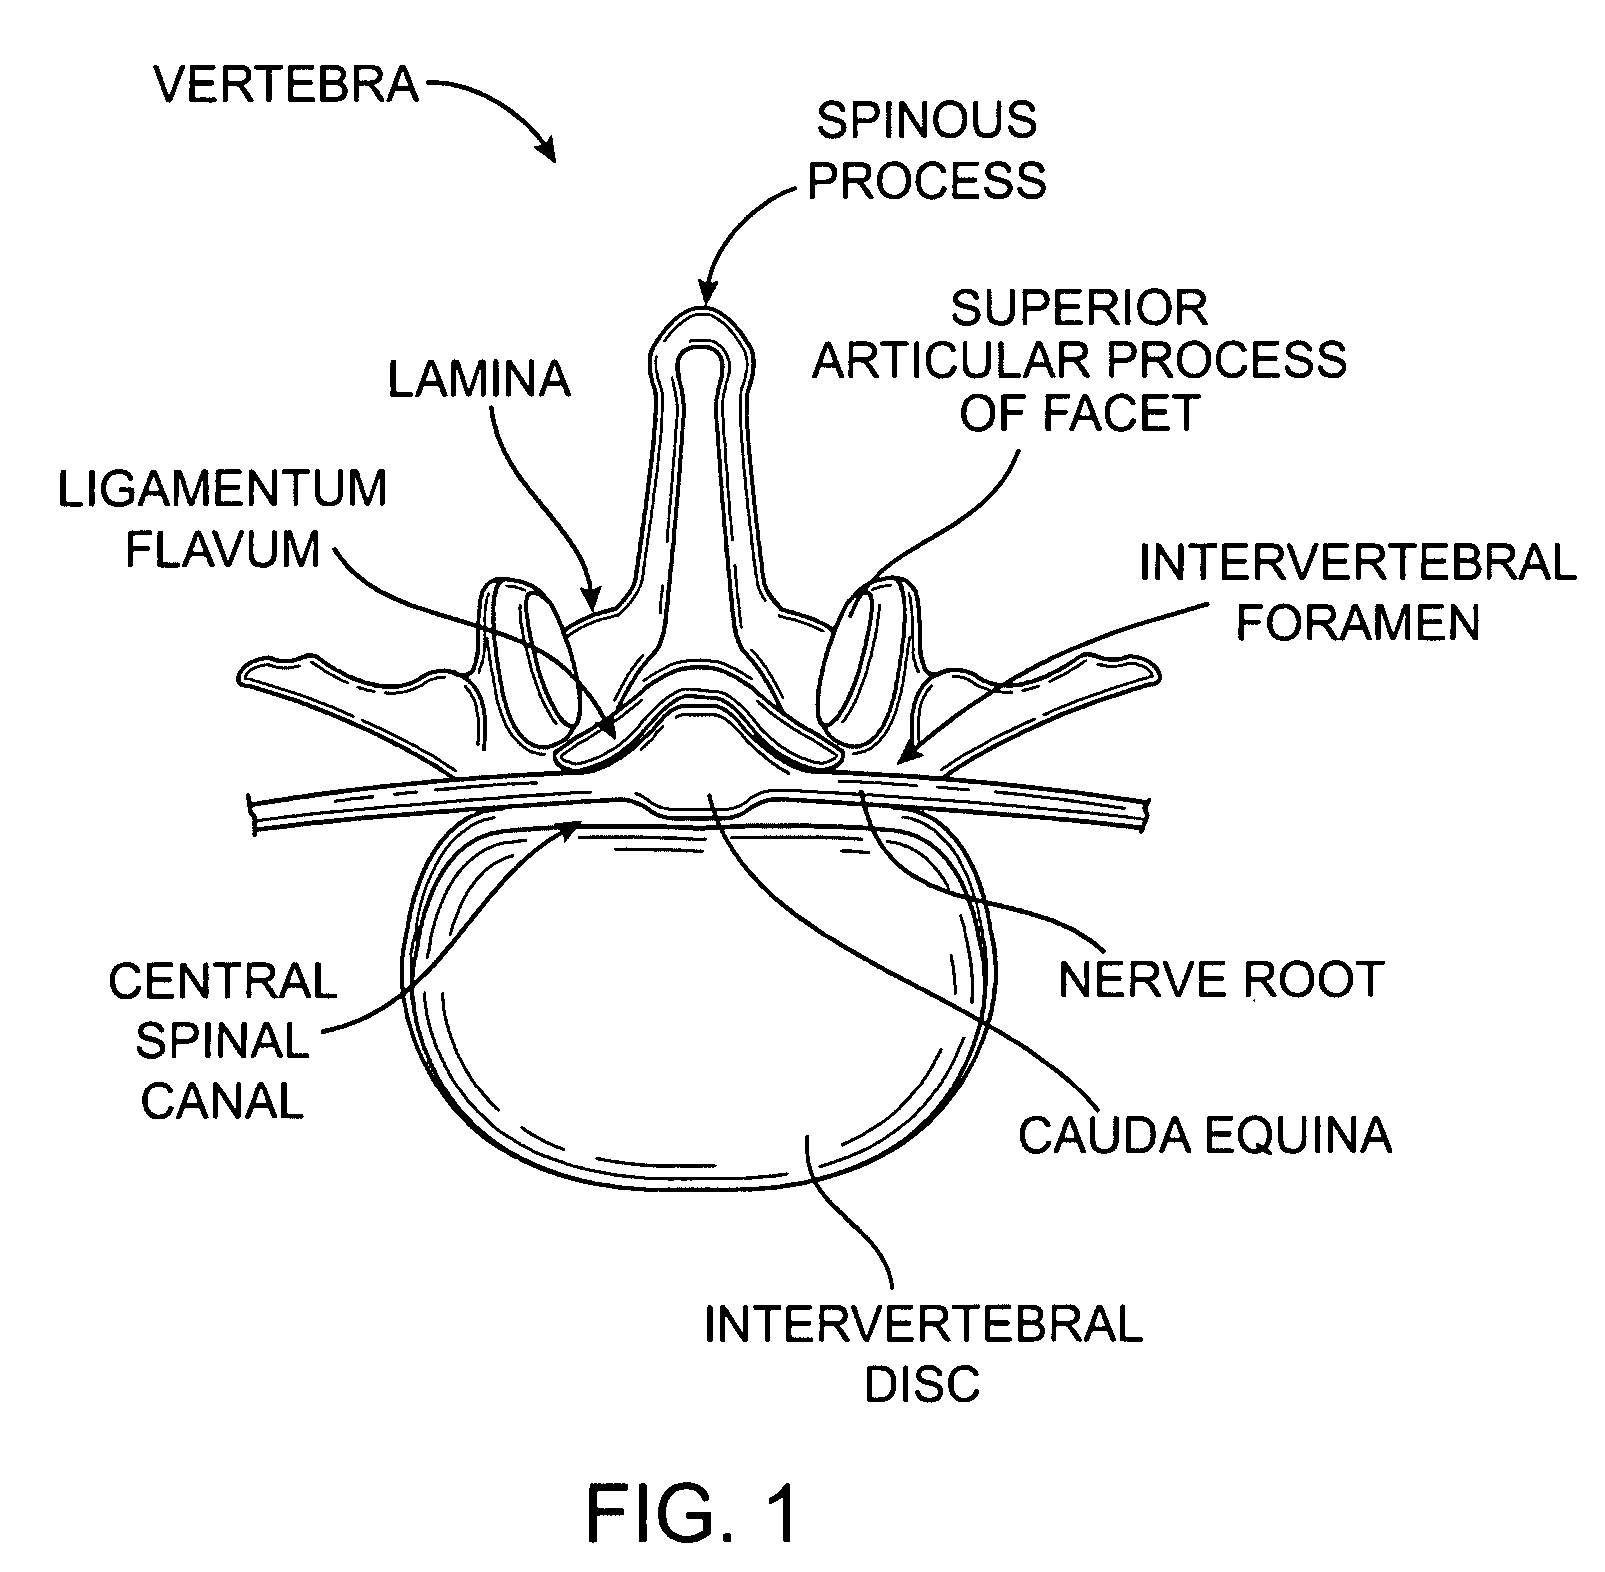 Tissue removal with at least partially flexible devices